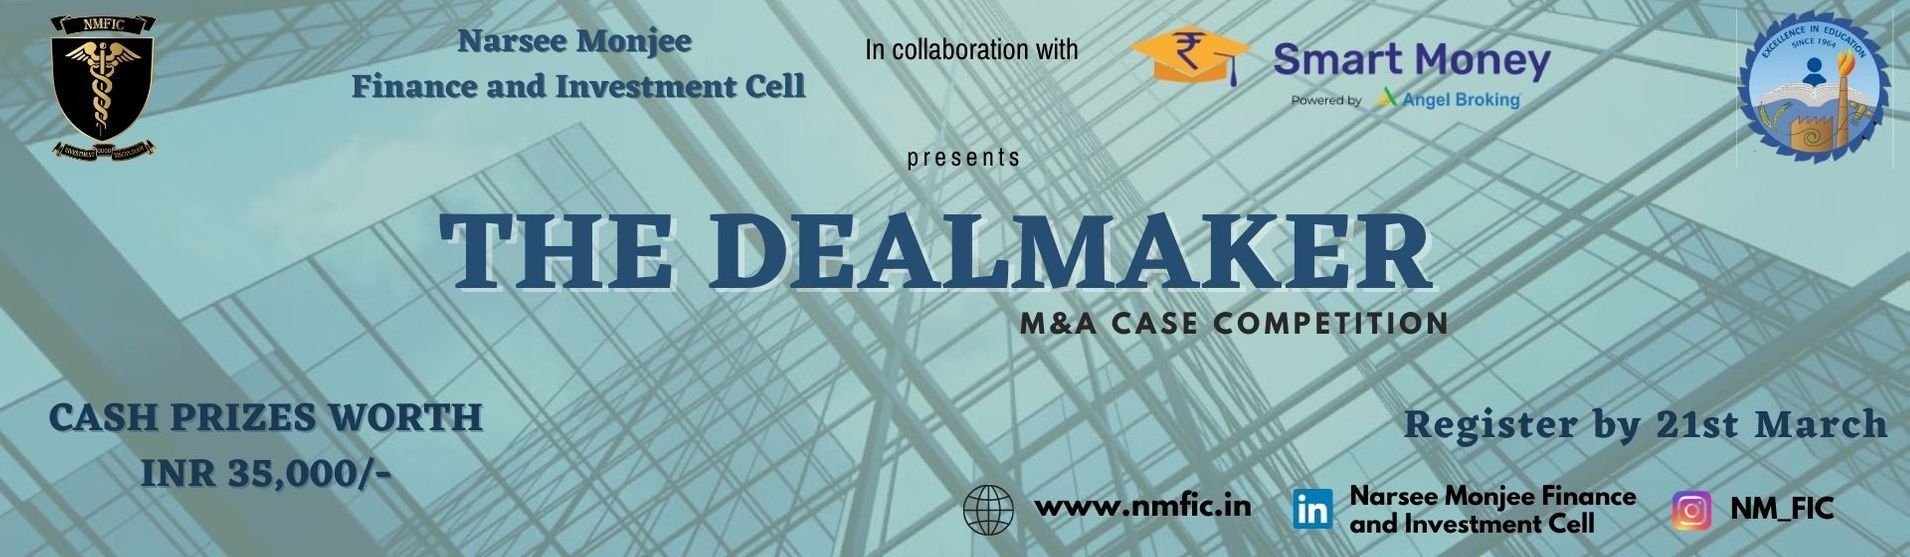 The Deal Maker Investment Banking Case Competition by Narsee Monjee